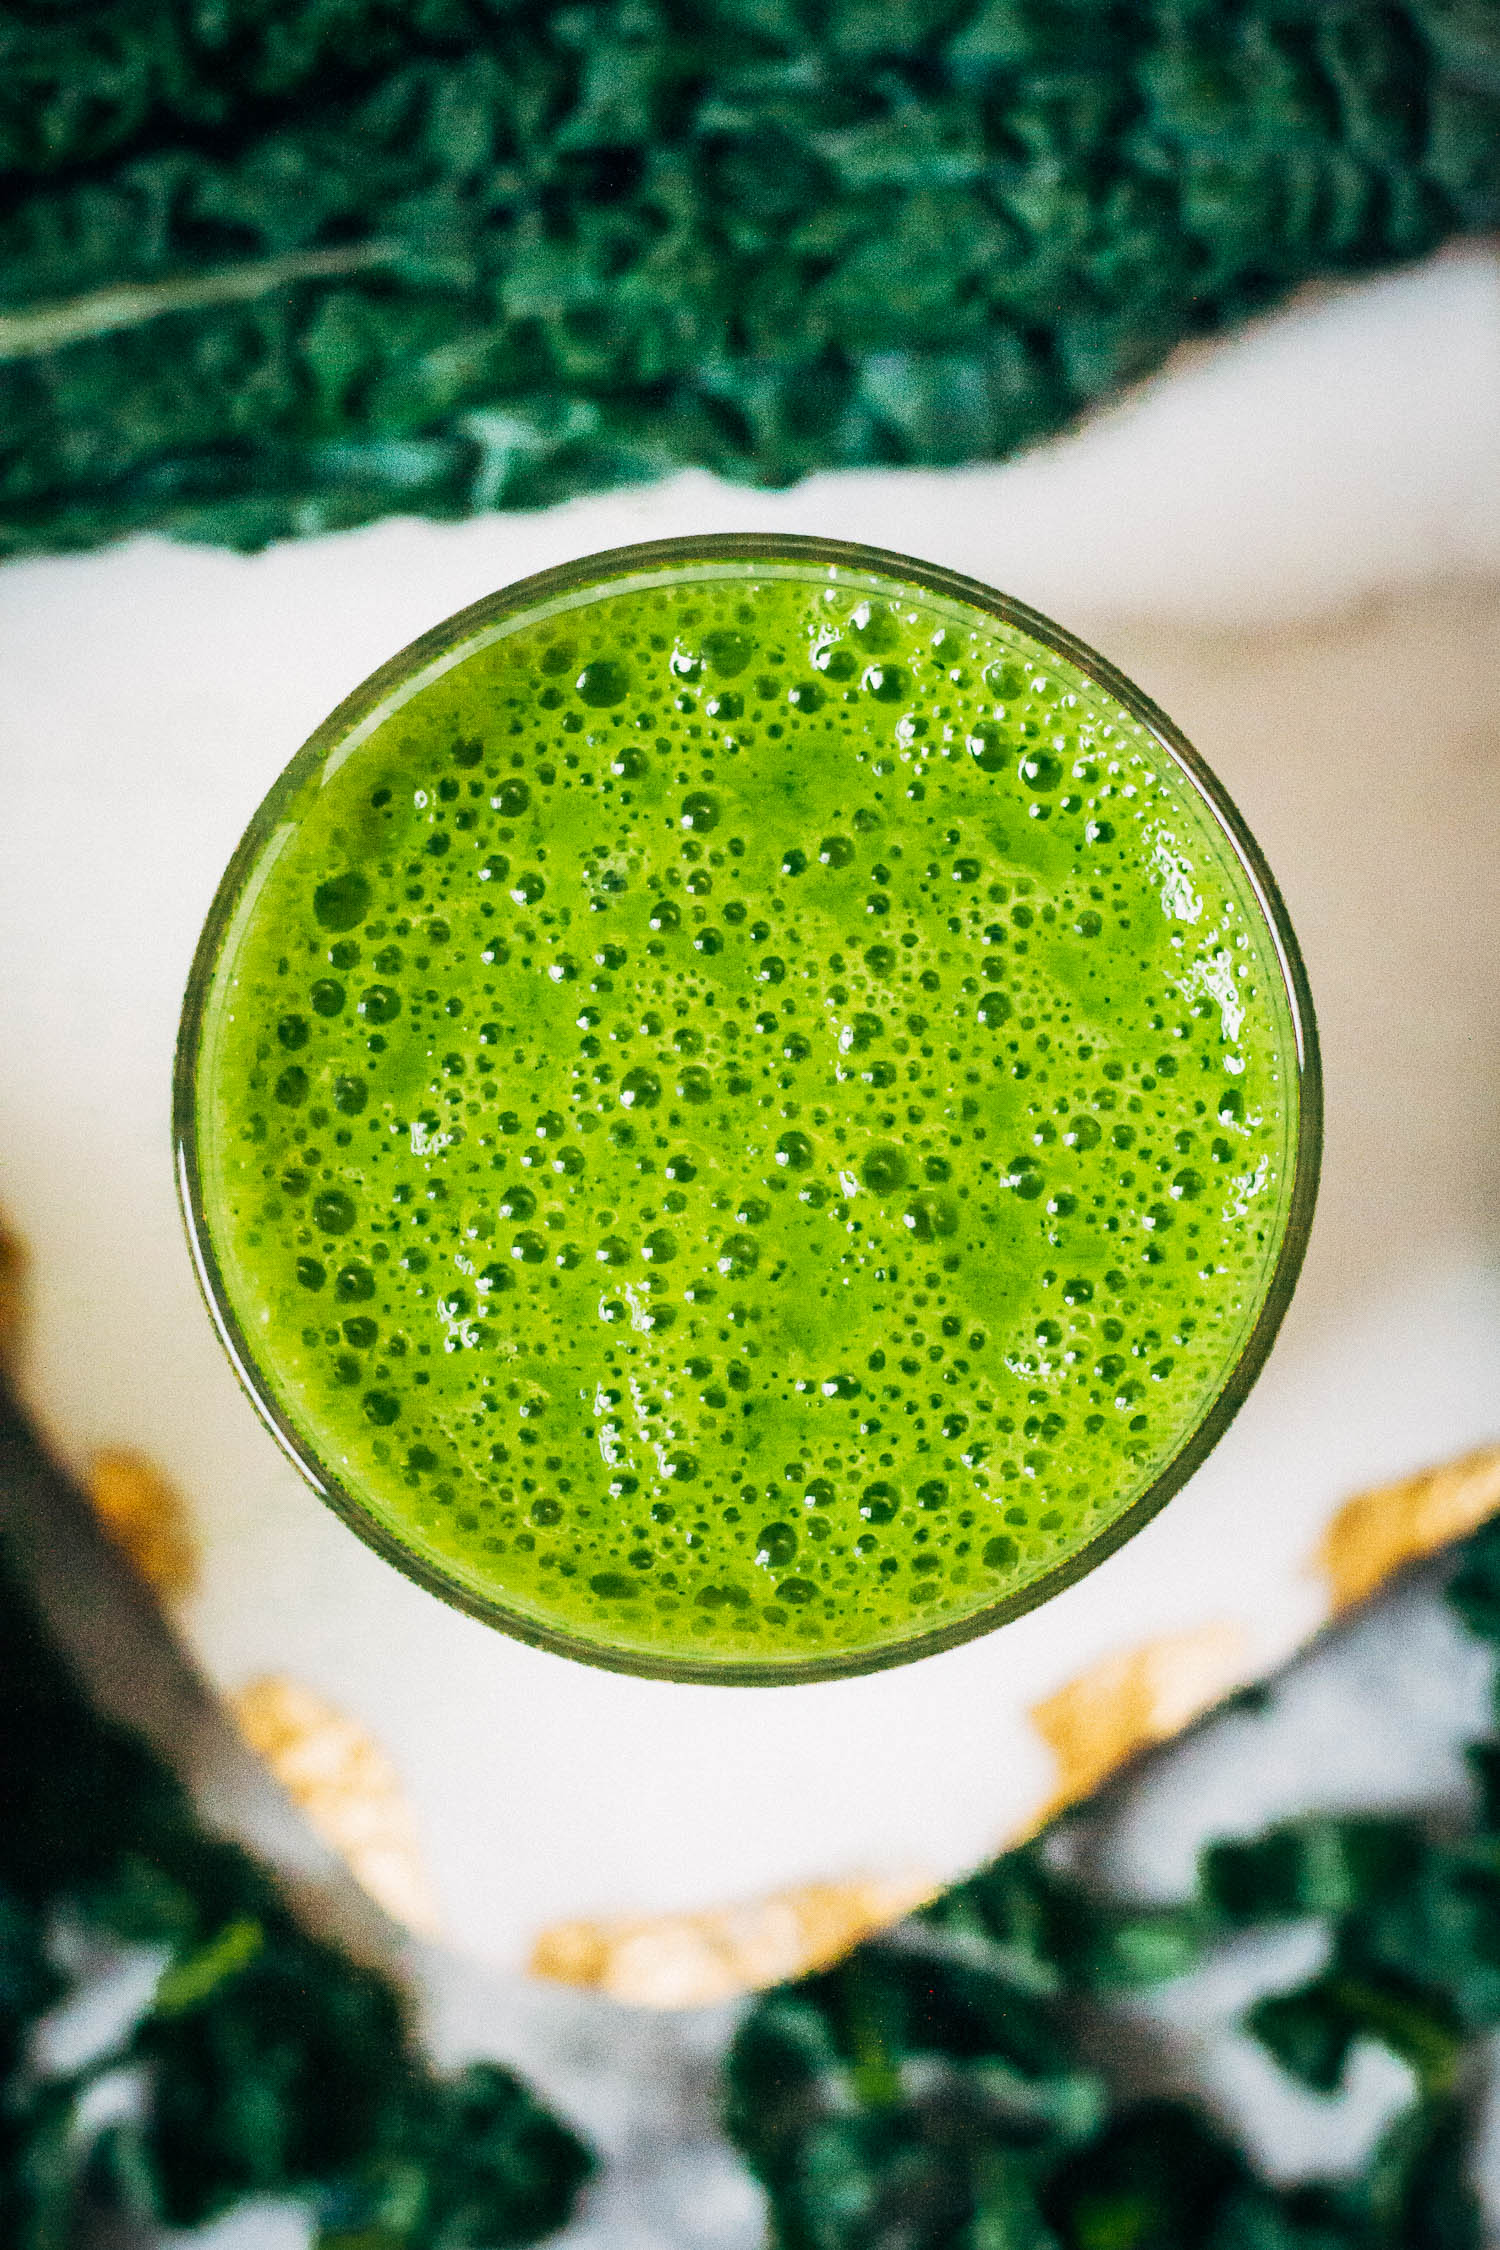 A Kale Pineapple Smoothie | Well and Full | #healthy #recipe